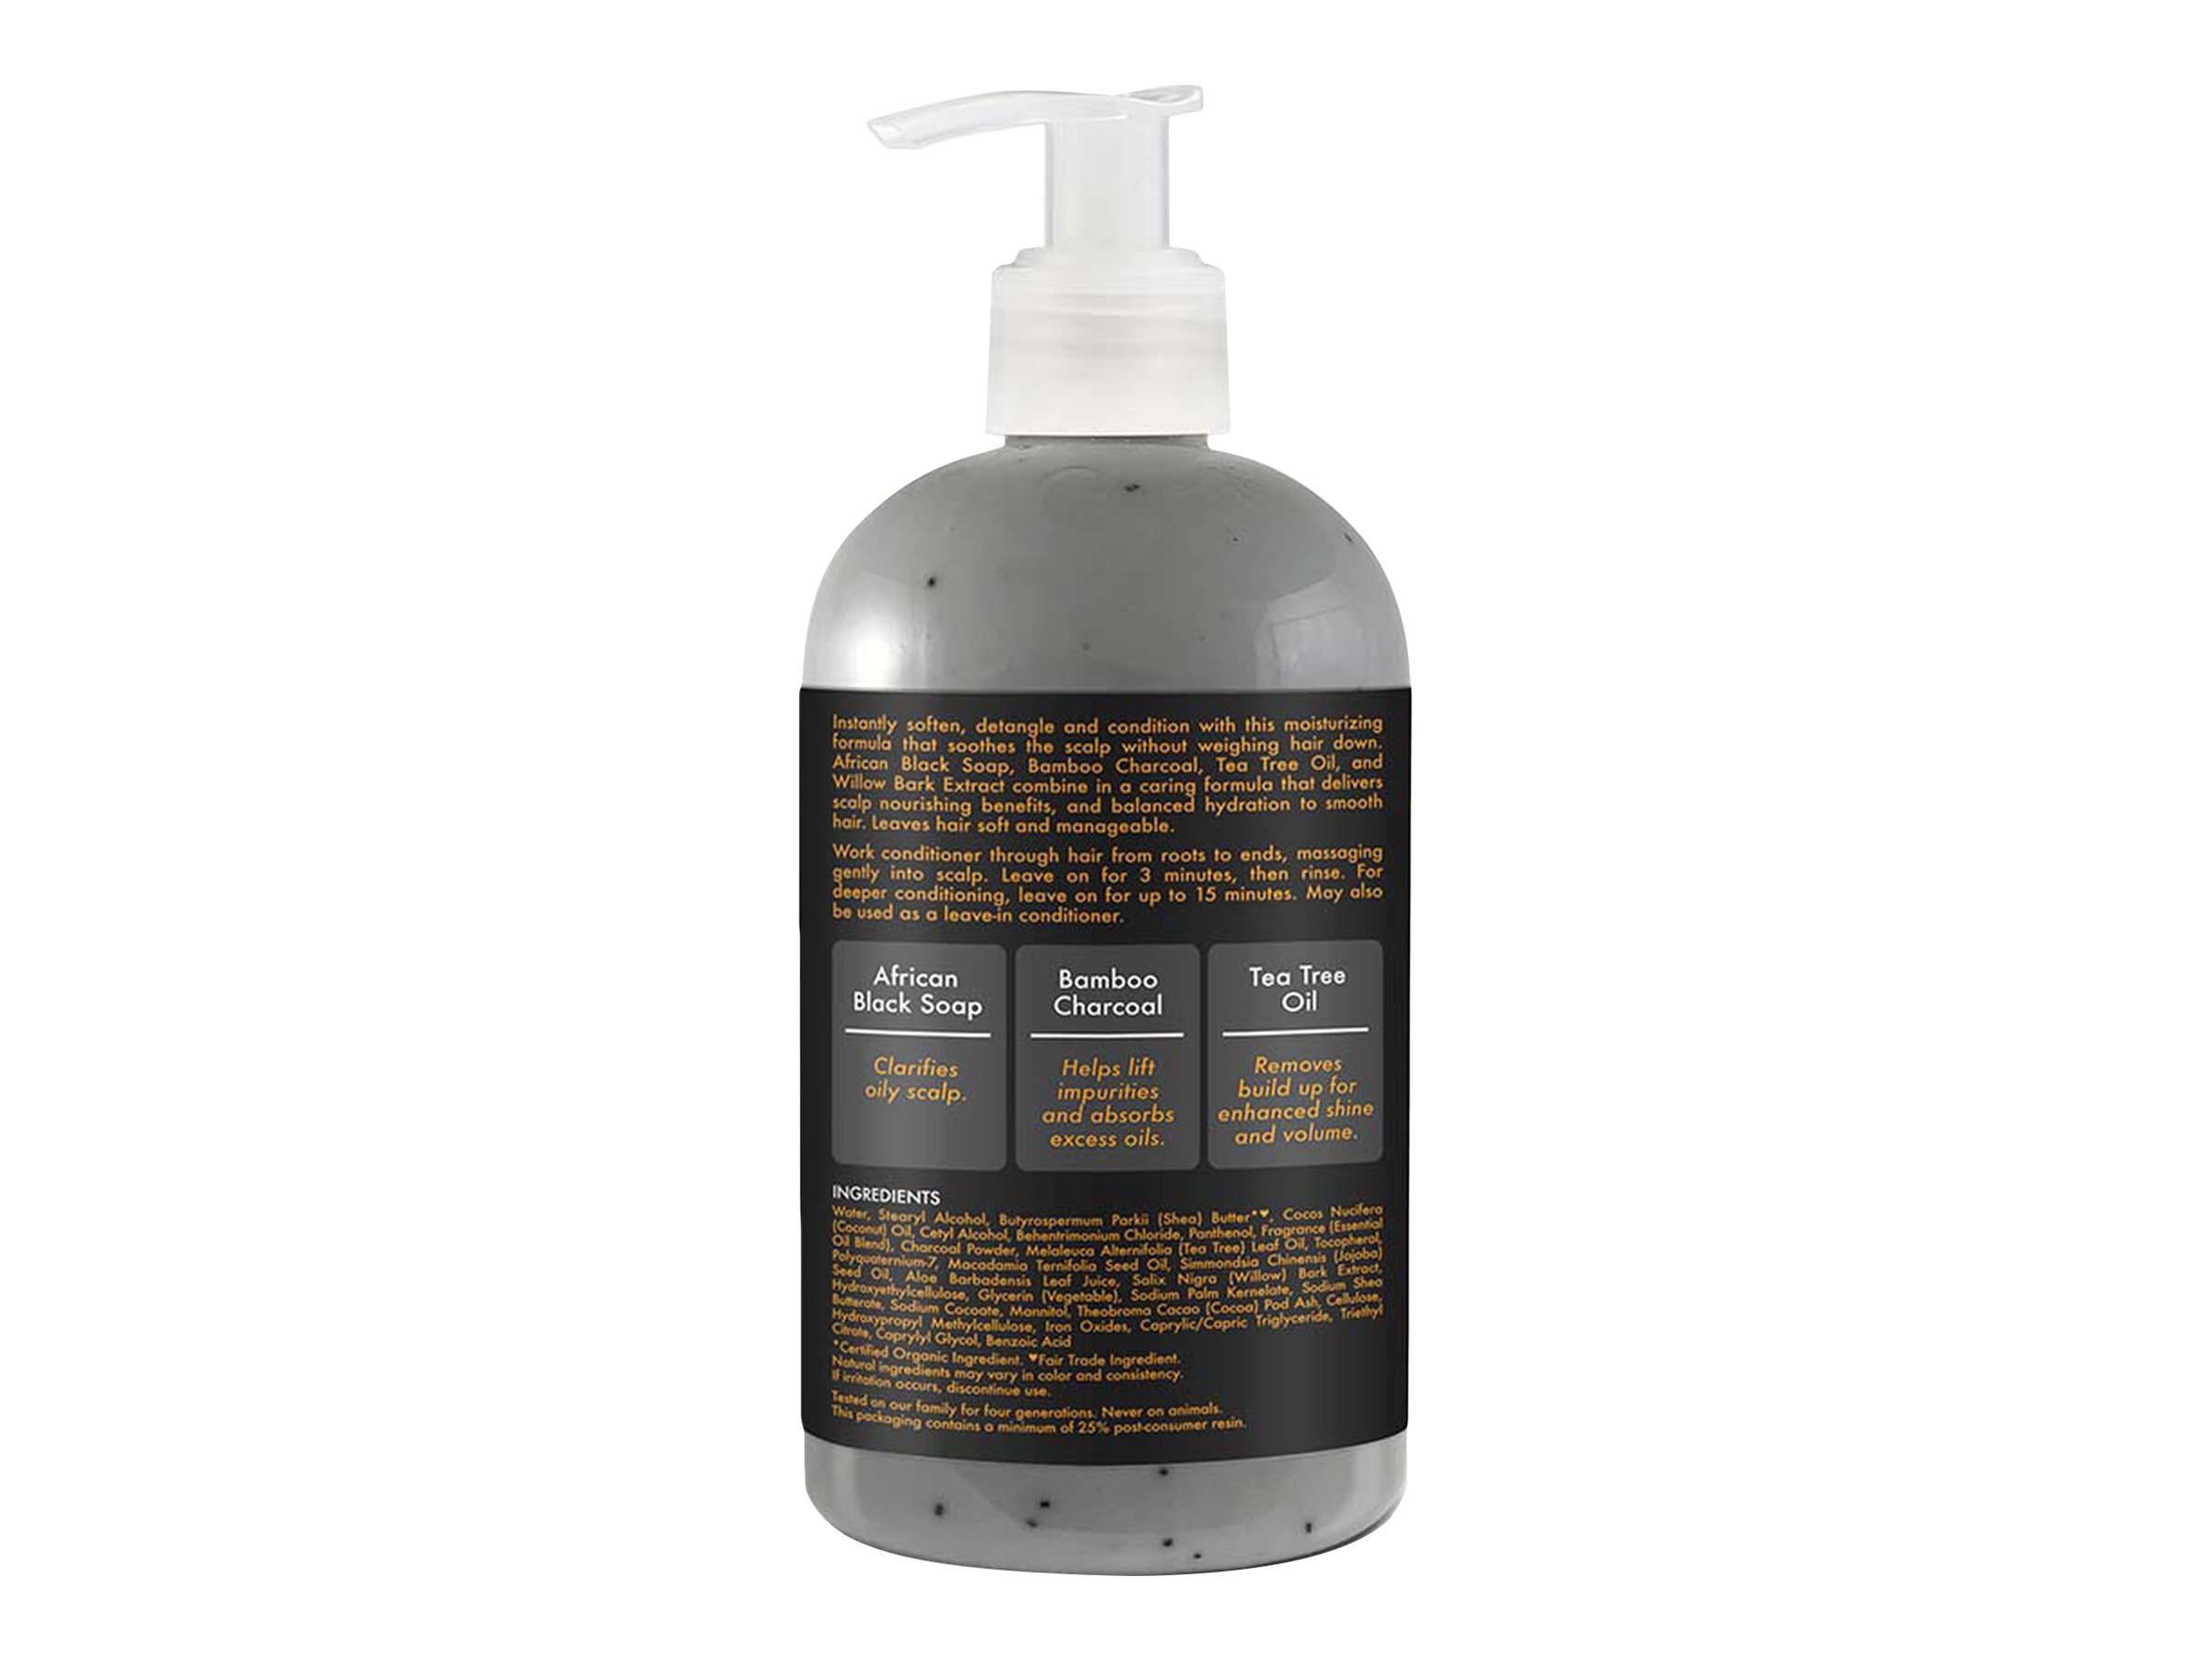 SheaMoisture African Black Soap Bamboo Charcoal Balancing Conditioner - 384ml